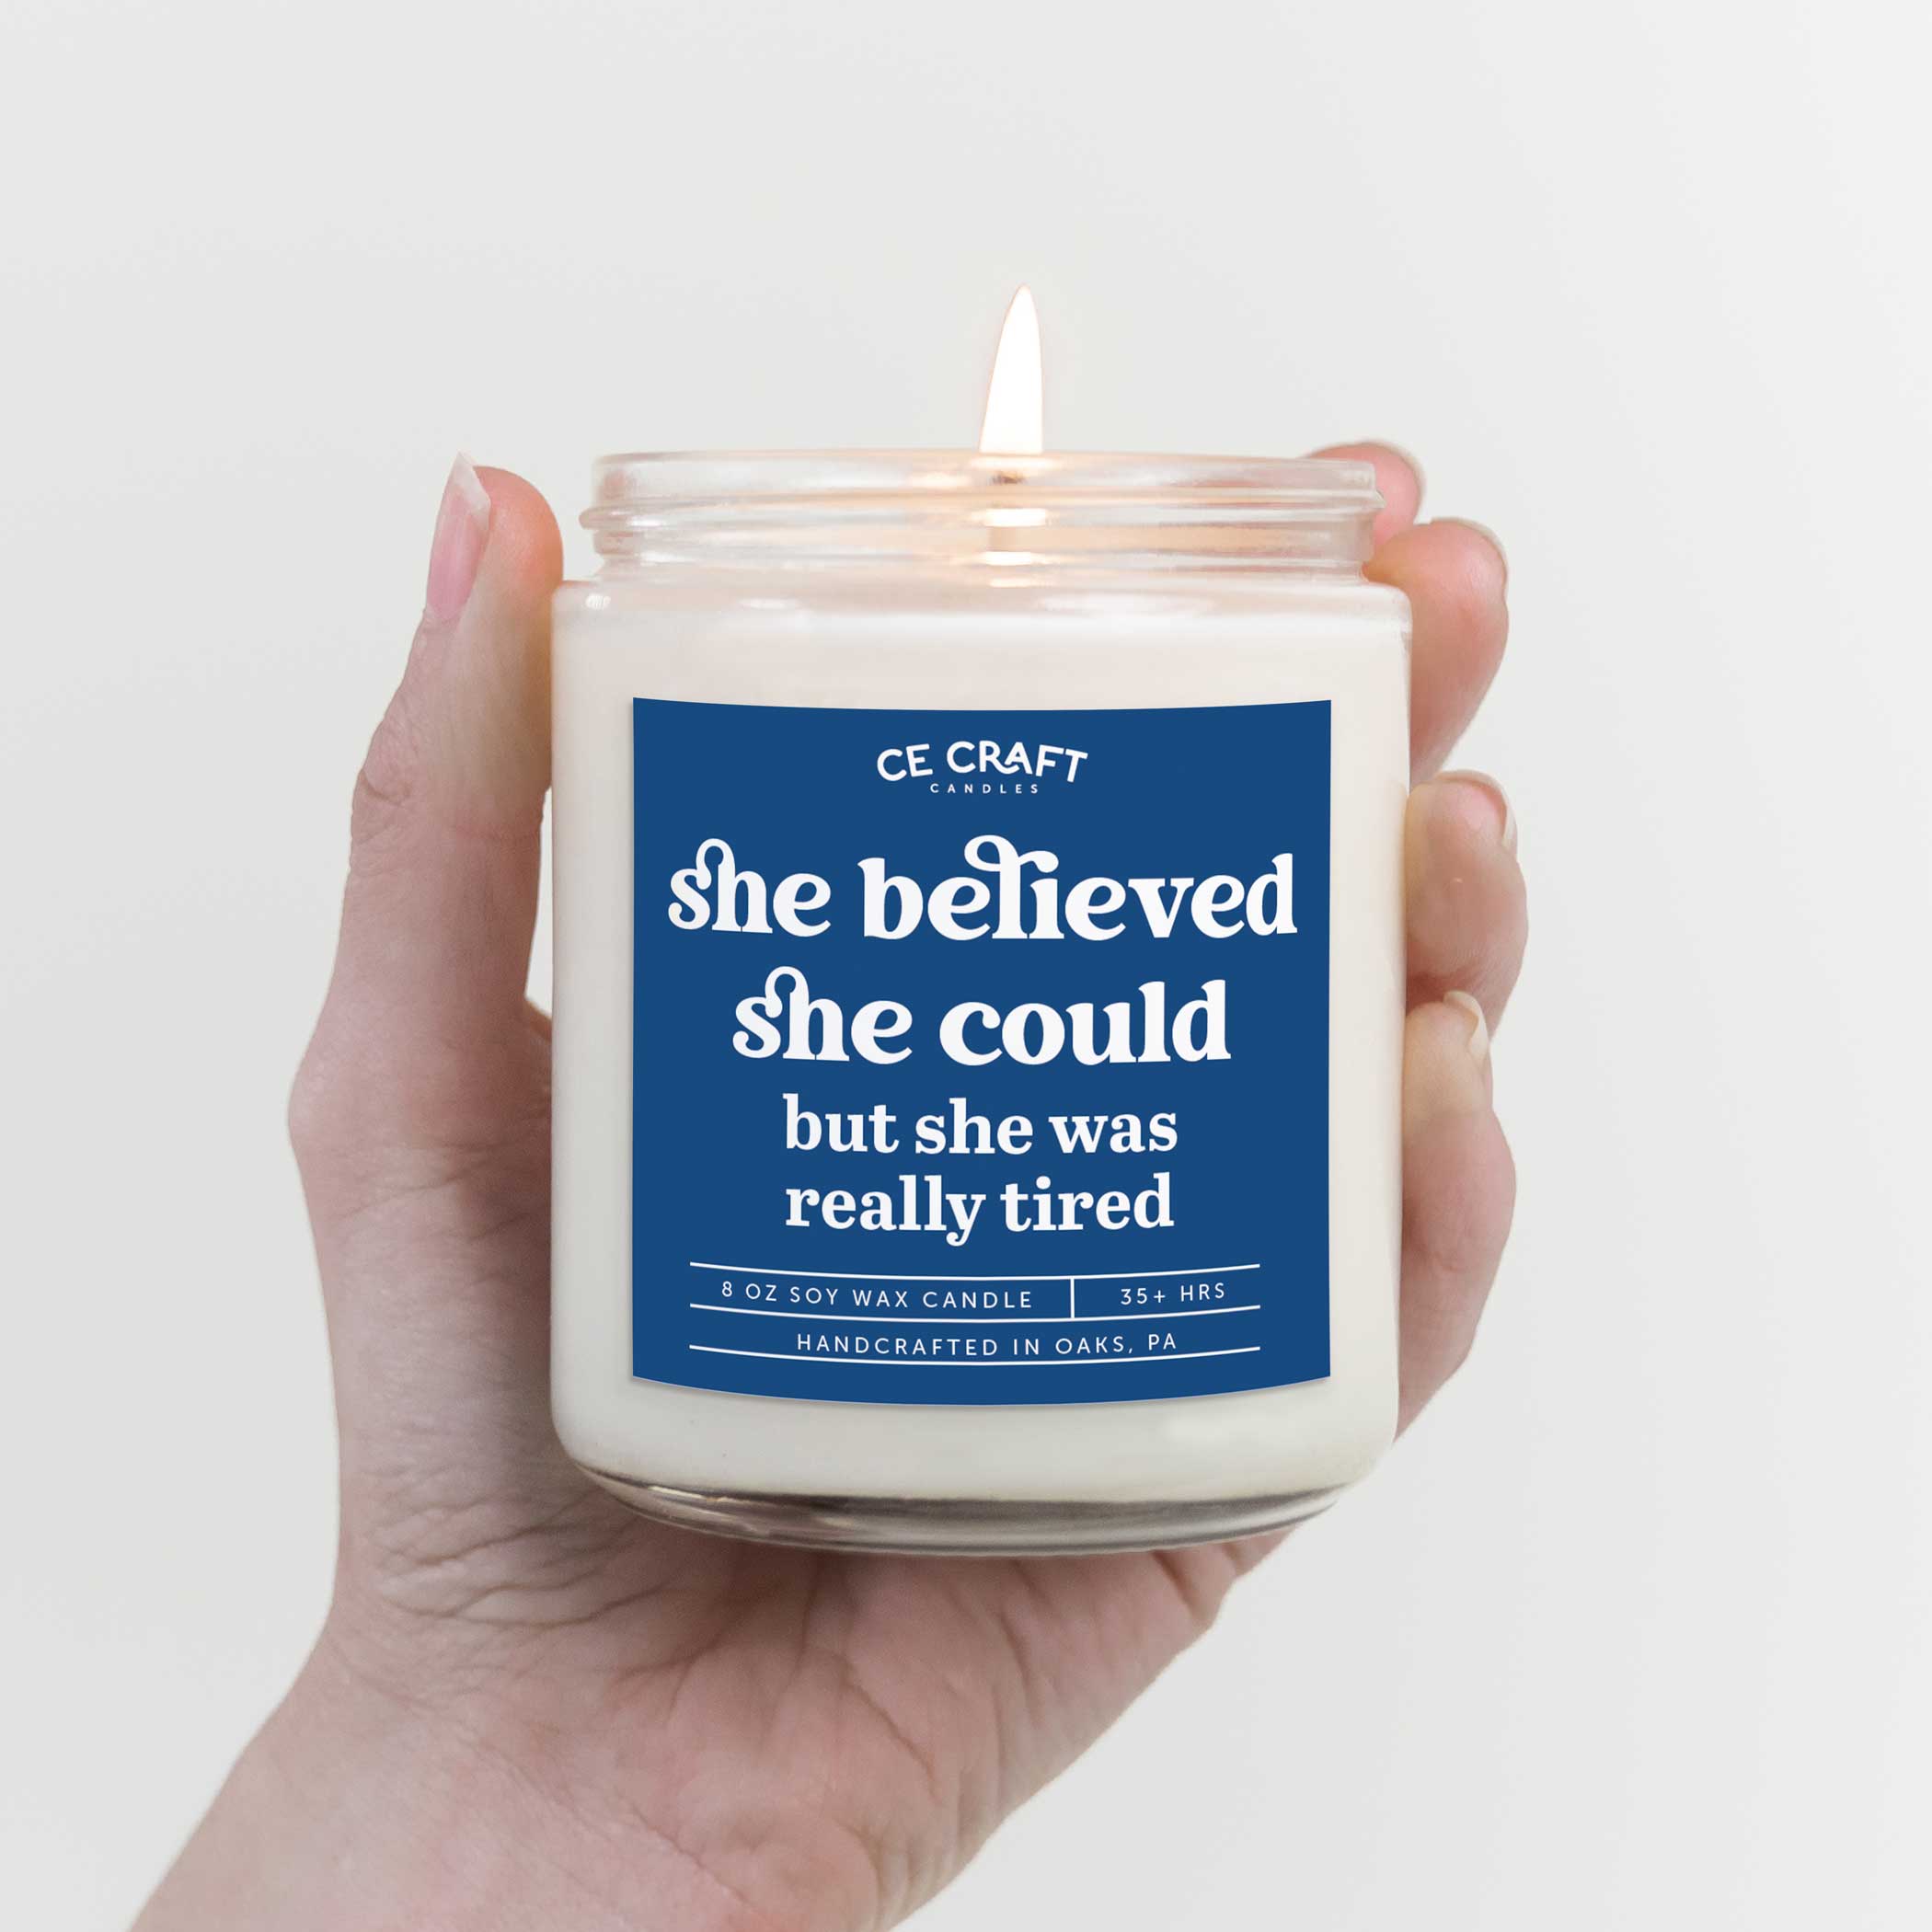 She Believed She Could But She Was Really Tired Soy Wax Candle